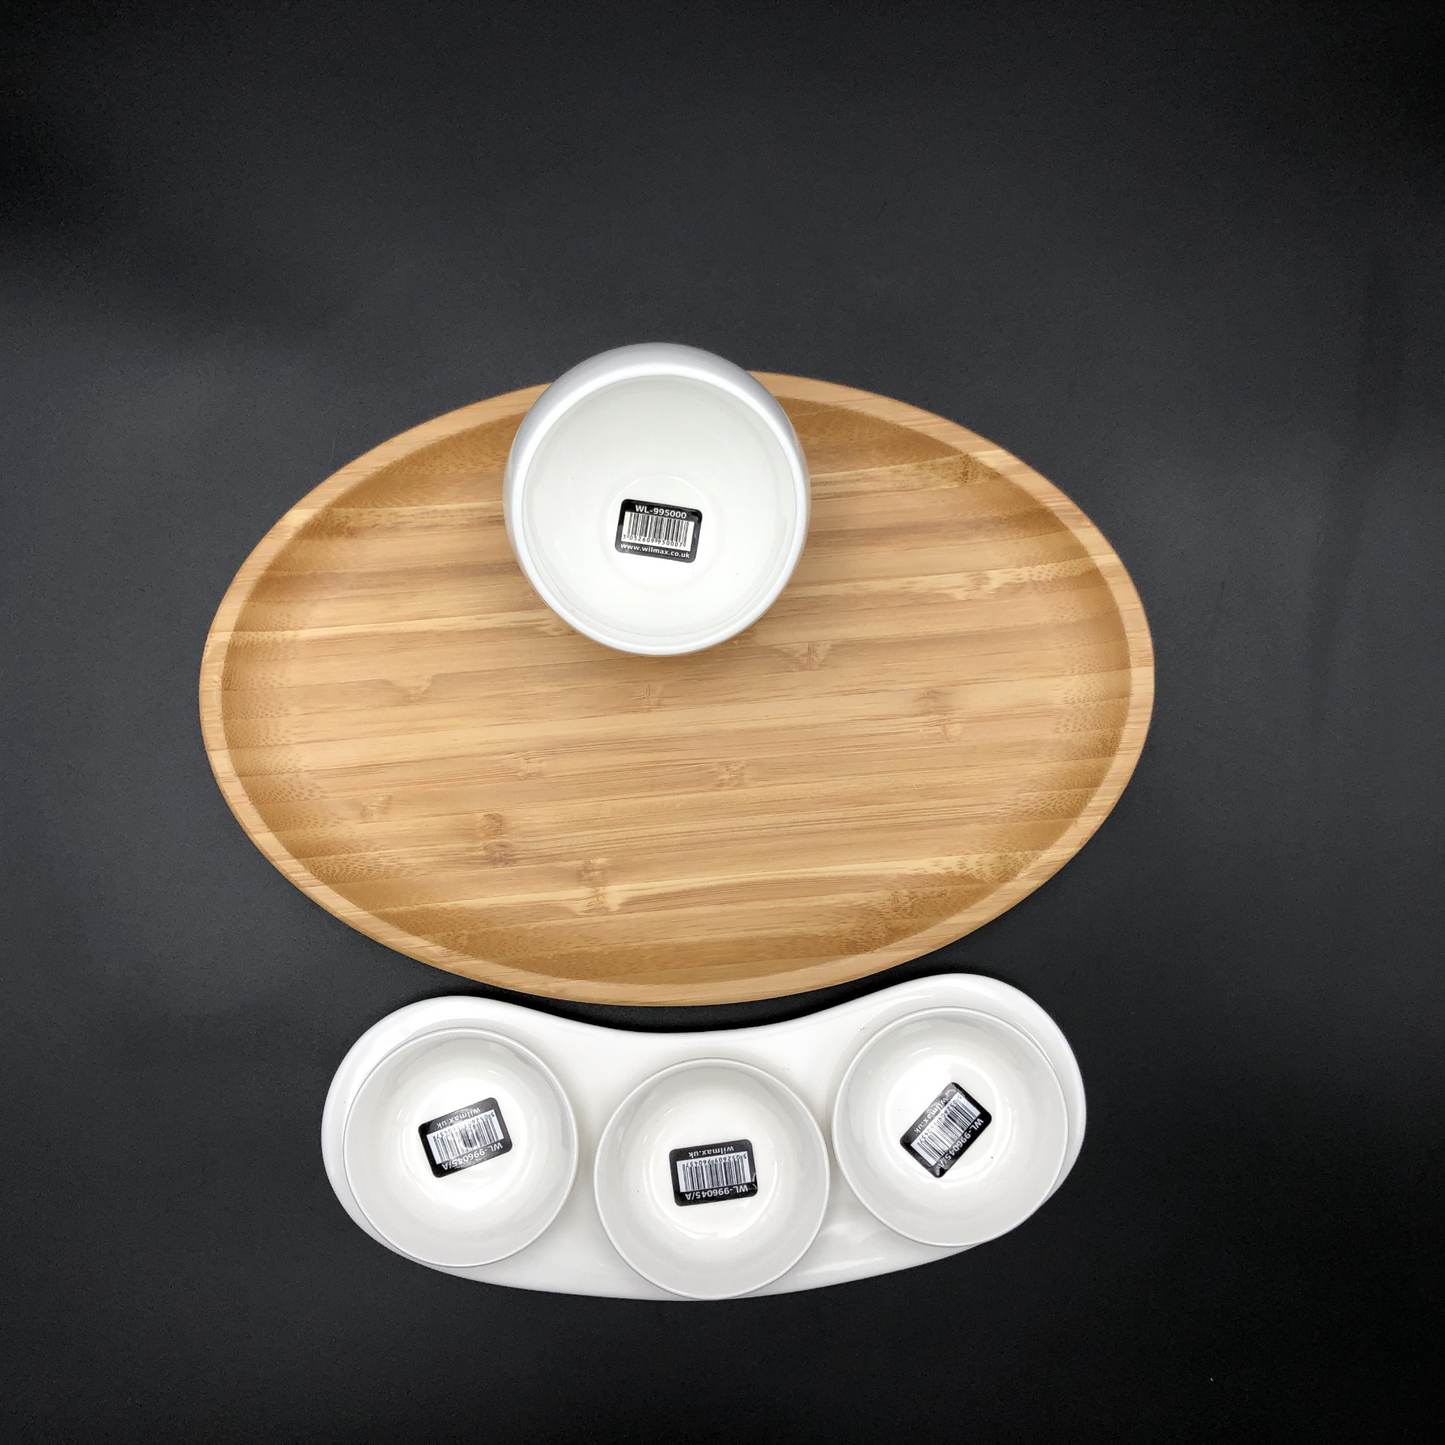 Wilmax Mignardises (Petit Four) Serving Set With Bamboo Oval Tray And Porcelain Dishes To Match WL-555023